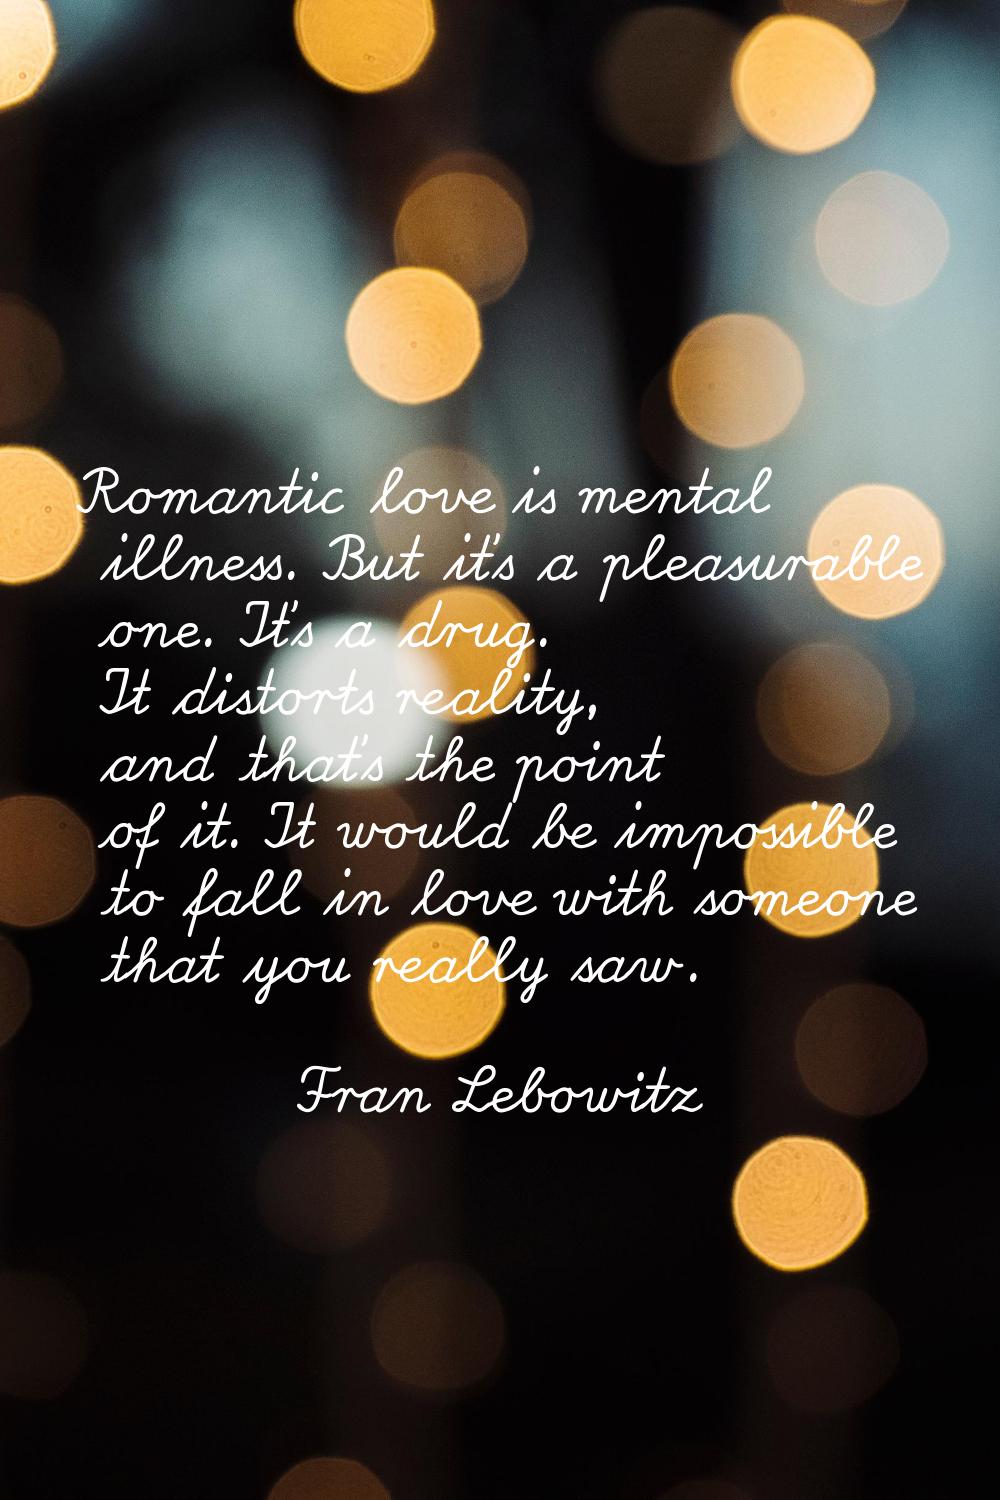 Romantic love is mental illness. But it's a pleasurable one. It's a drug. It distorts reality, and 